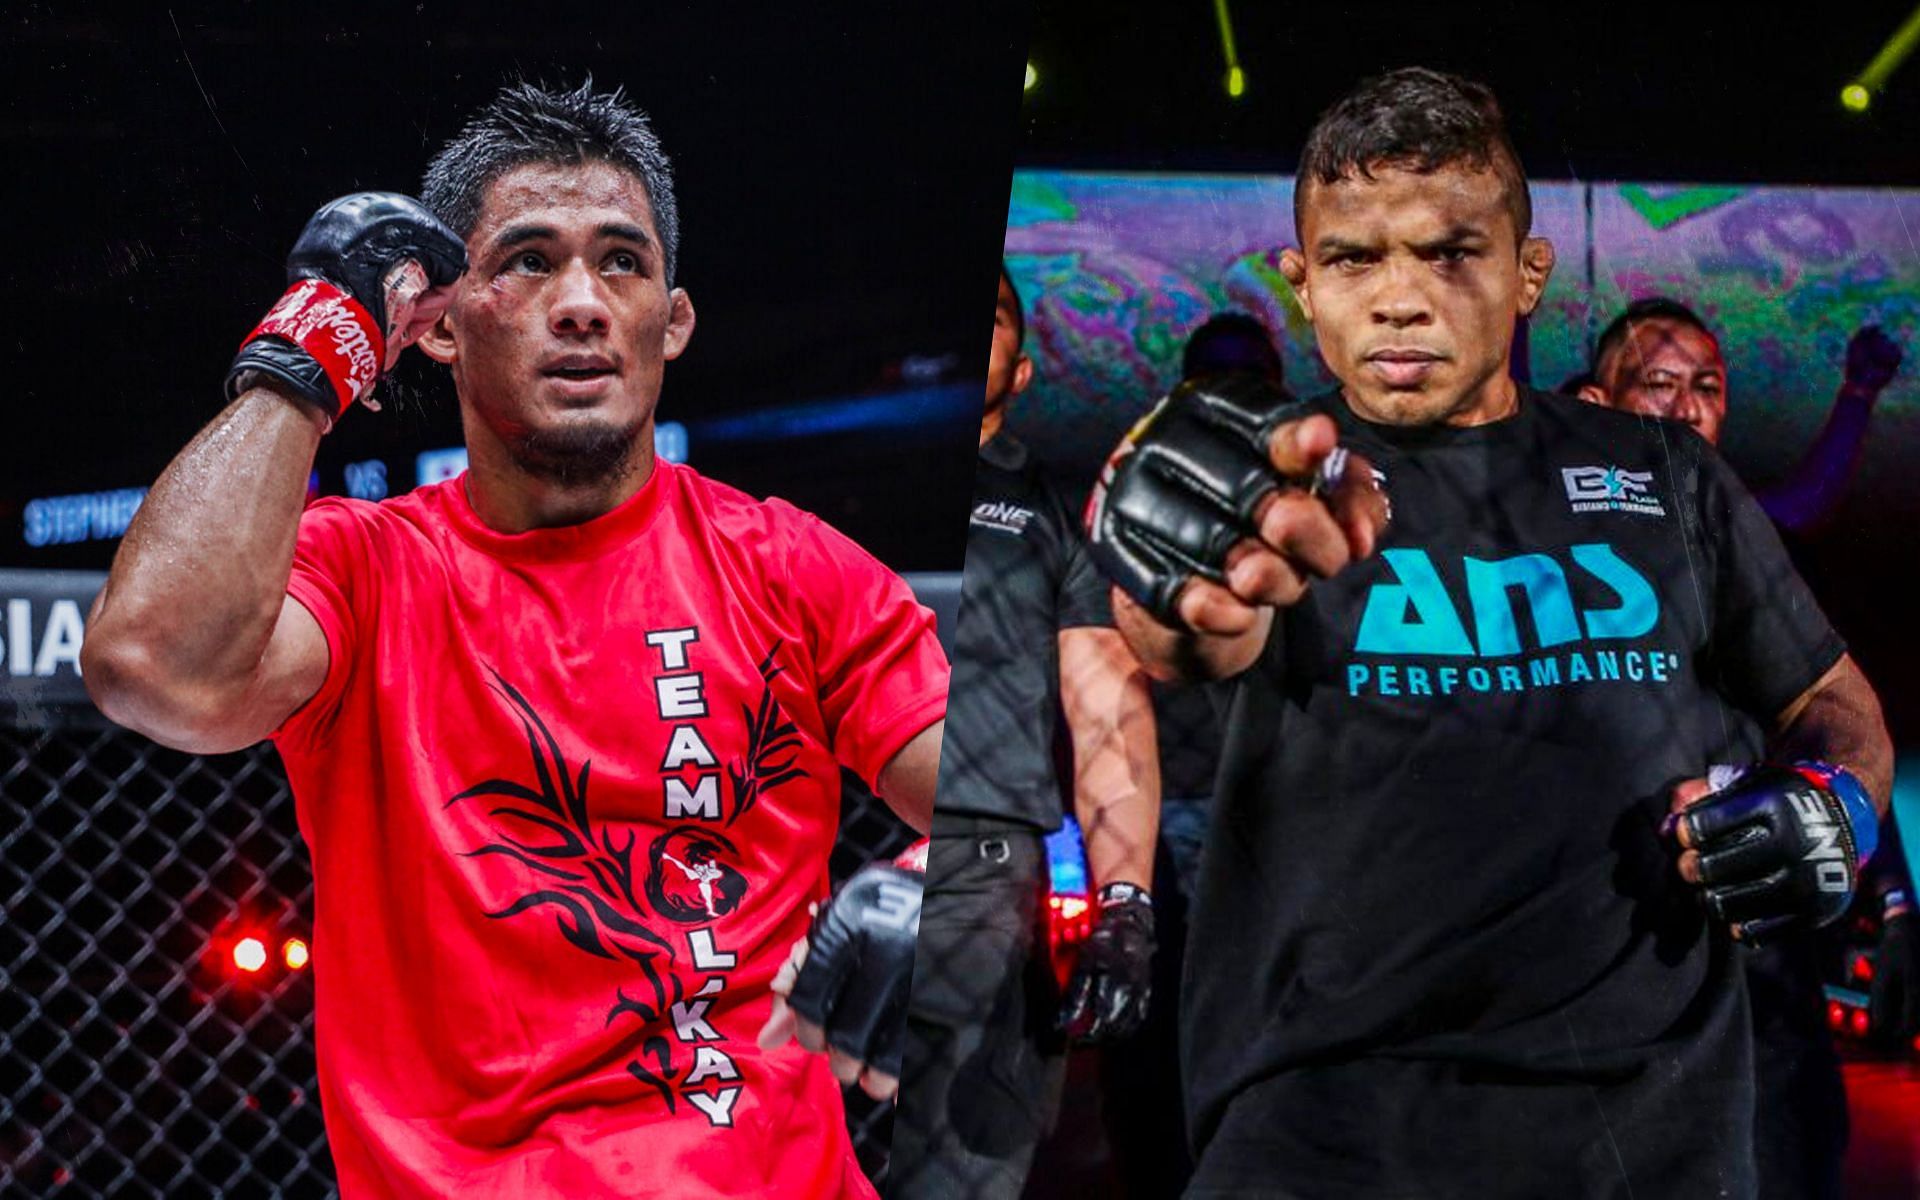 Stephen Loman (left) and Bibiano Fernandes (right). [Photos ONE Championship]